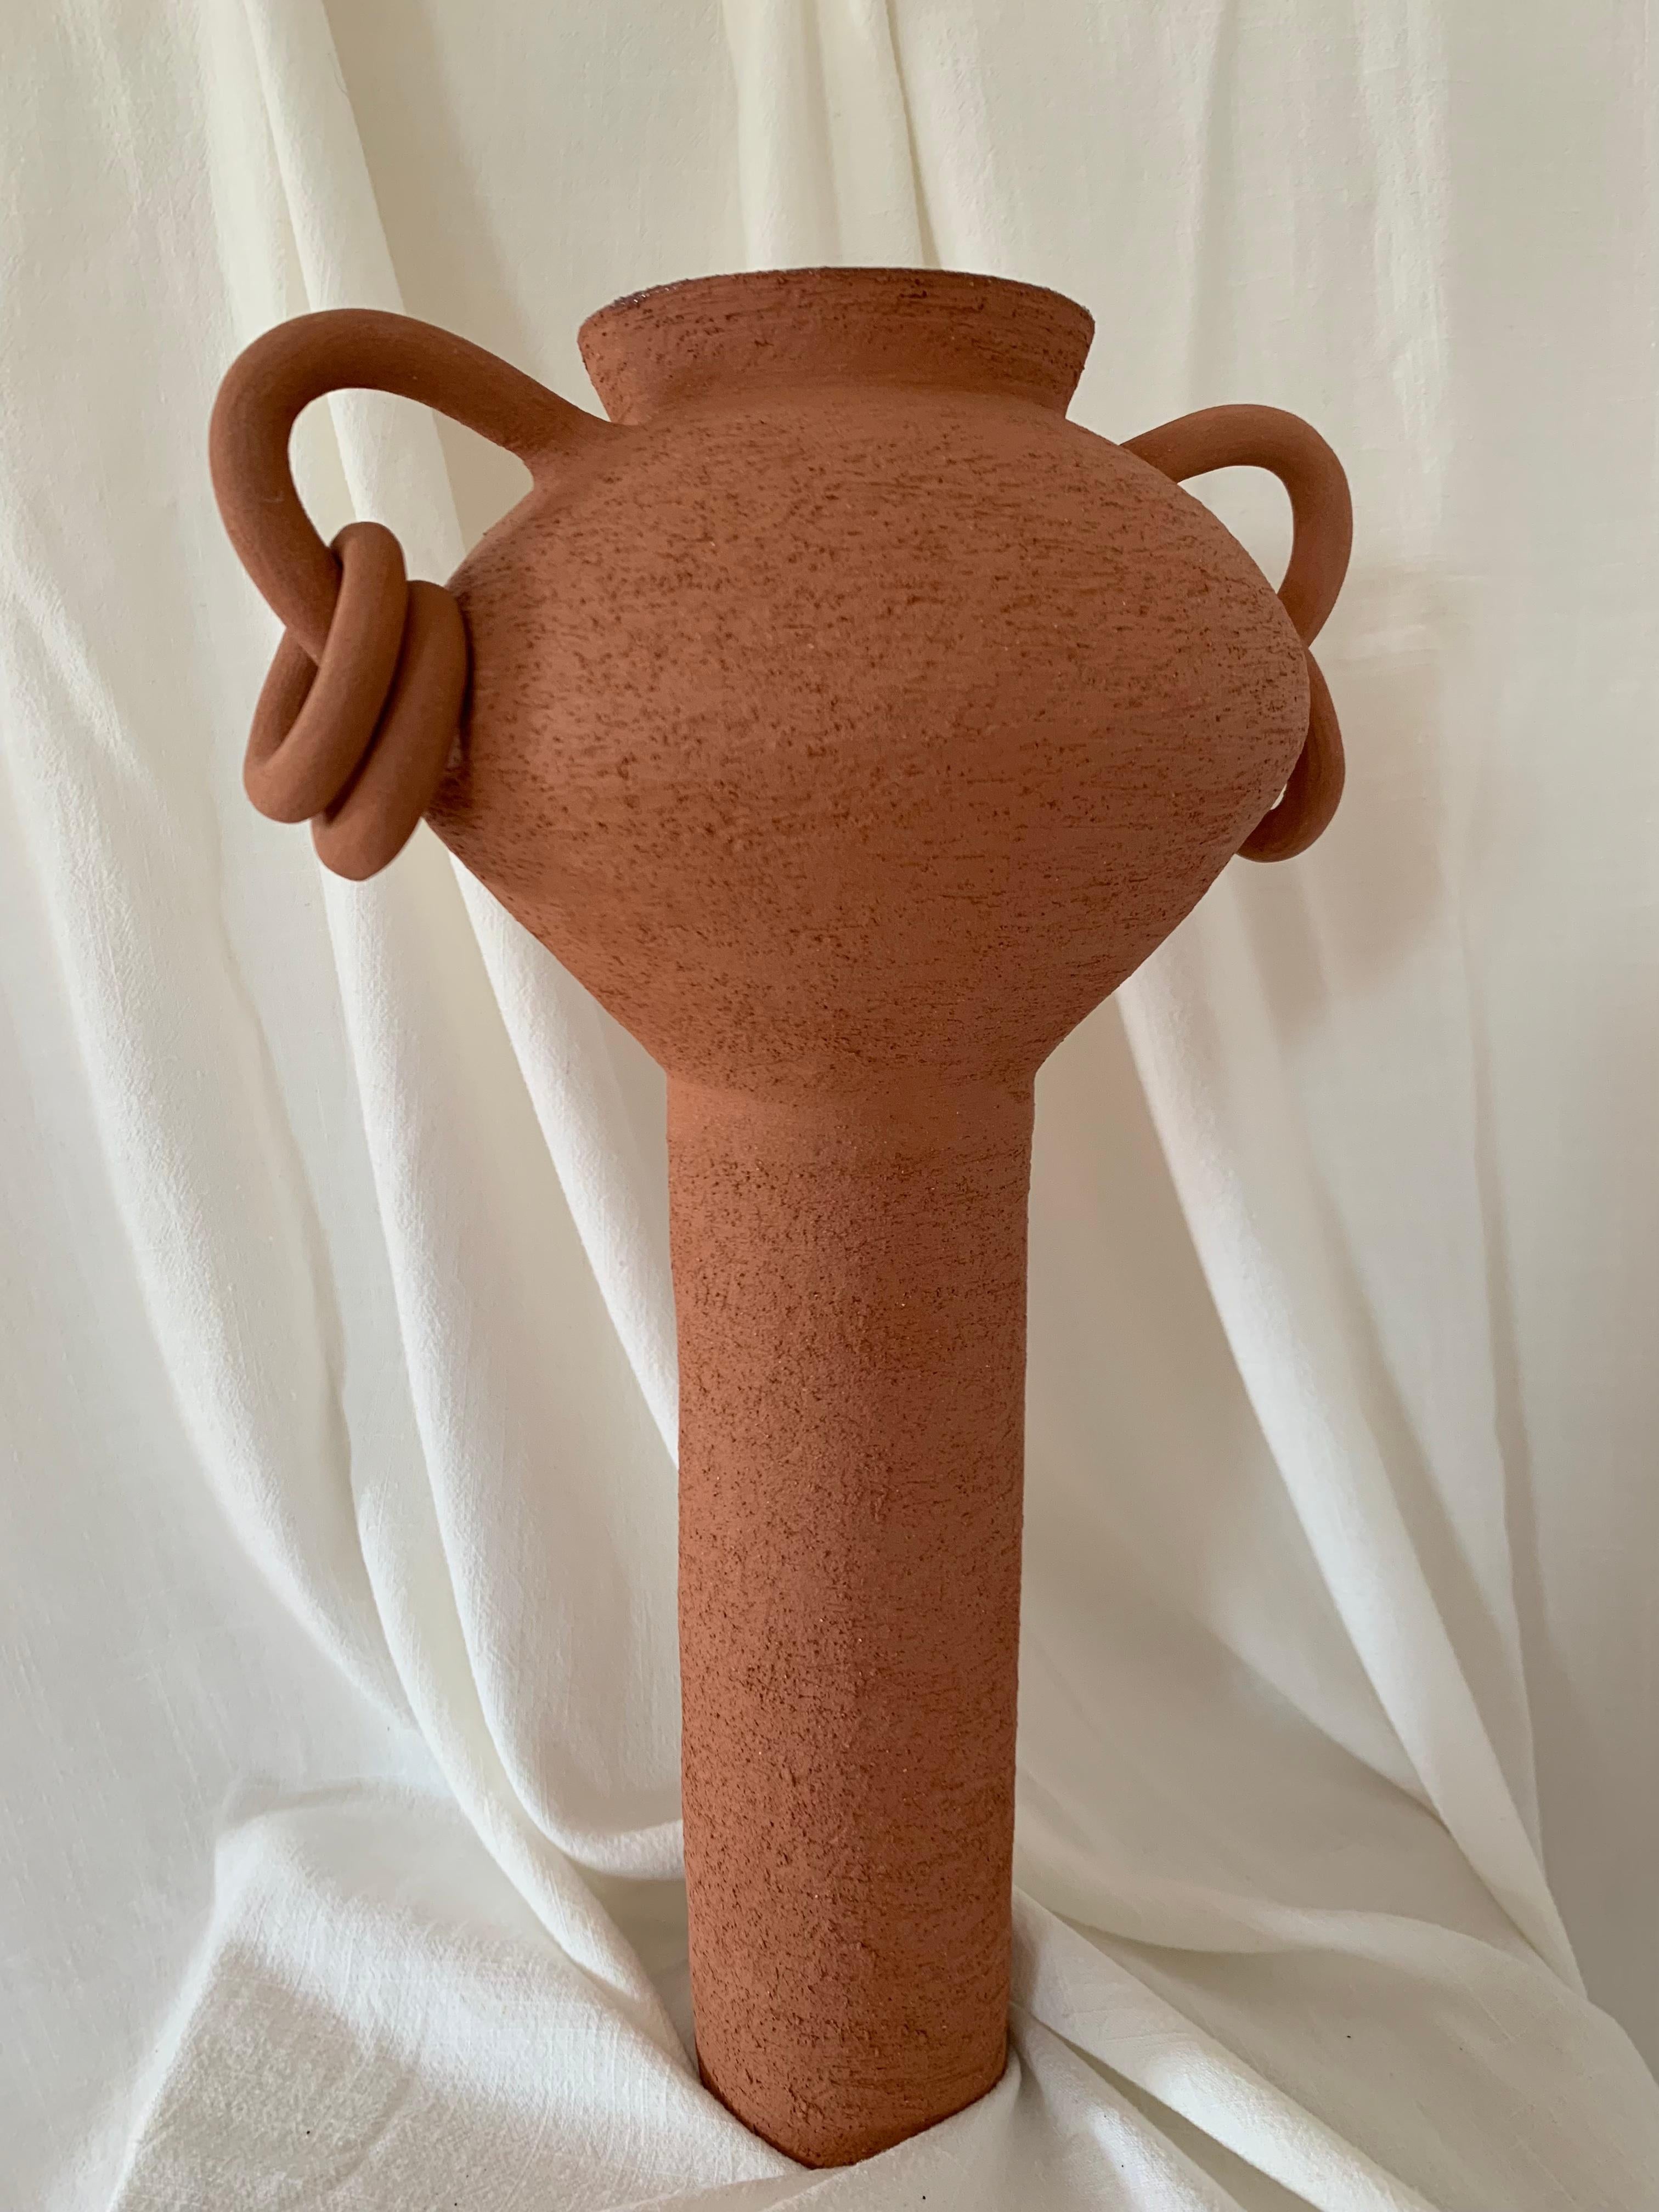 Glazed Contemporary Ruby Bell Ceramics Terracotta Pedestal Vase with Handles and Rings